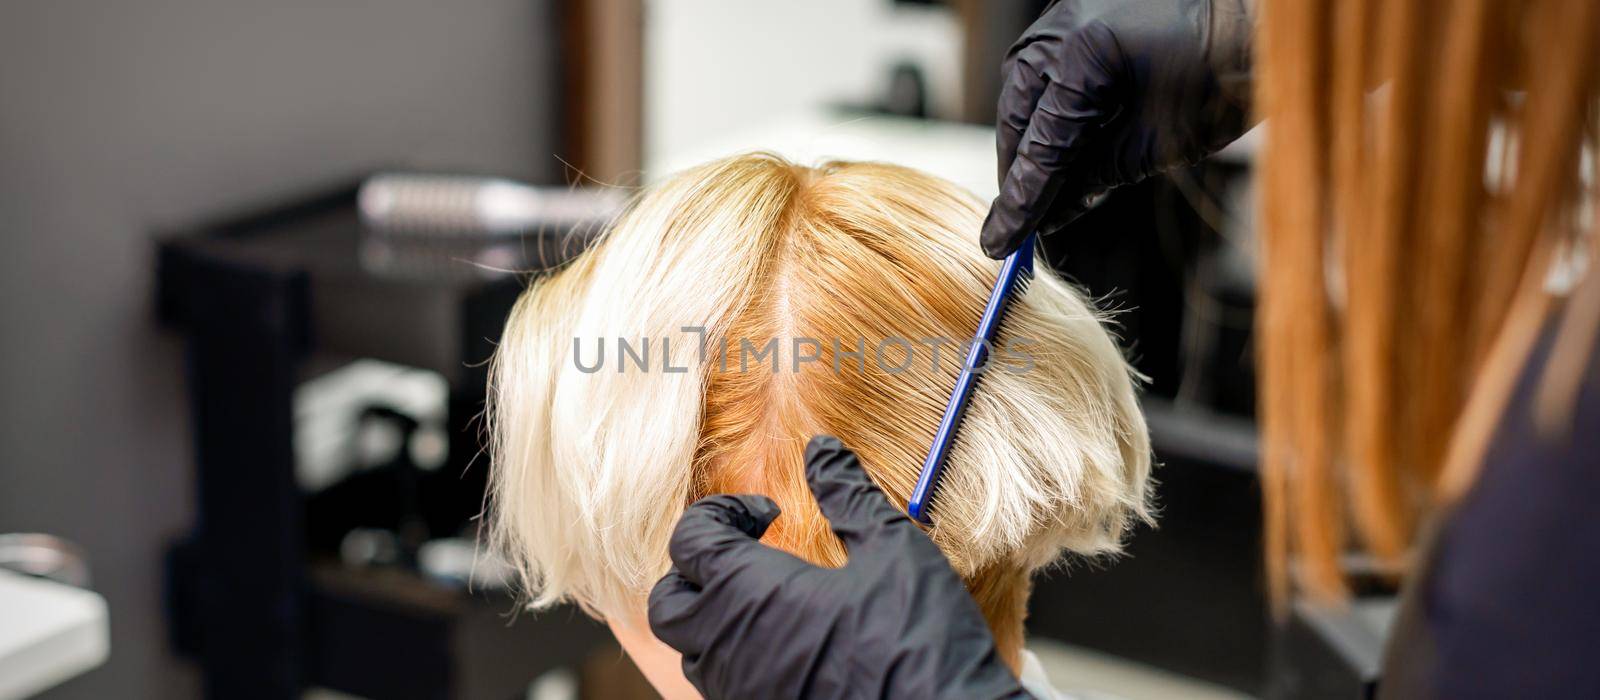 Hairdresser combing female short blonde hair before dyeing in a hair salon